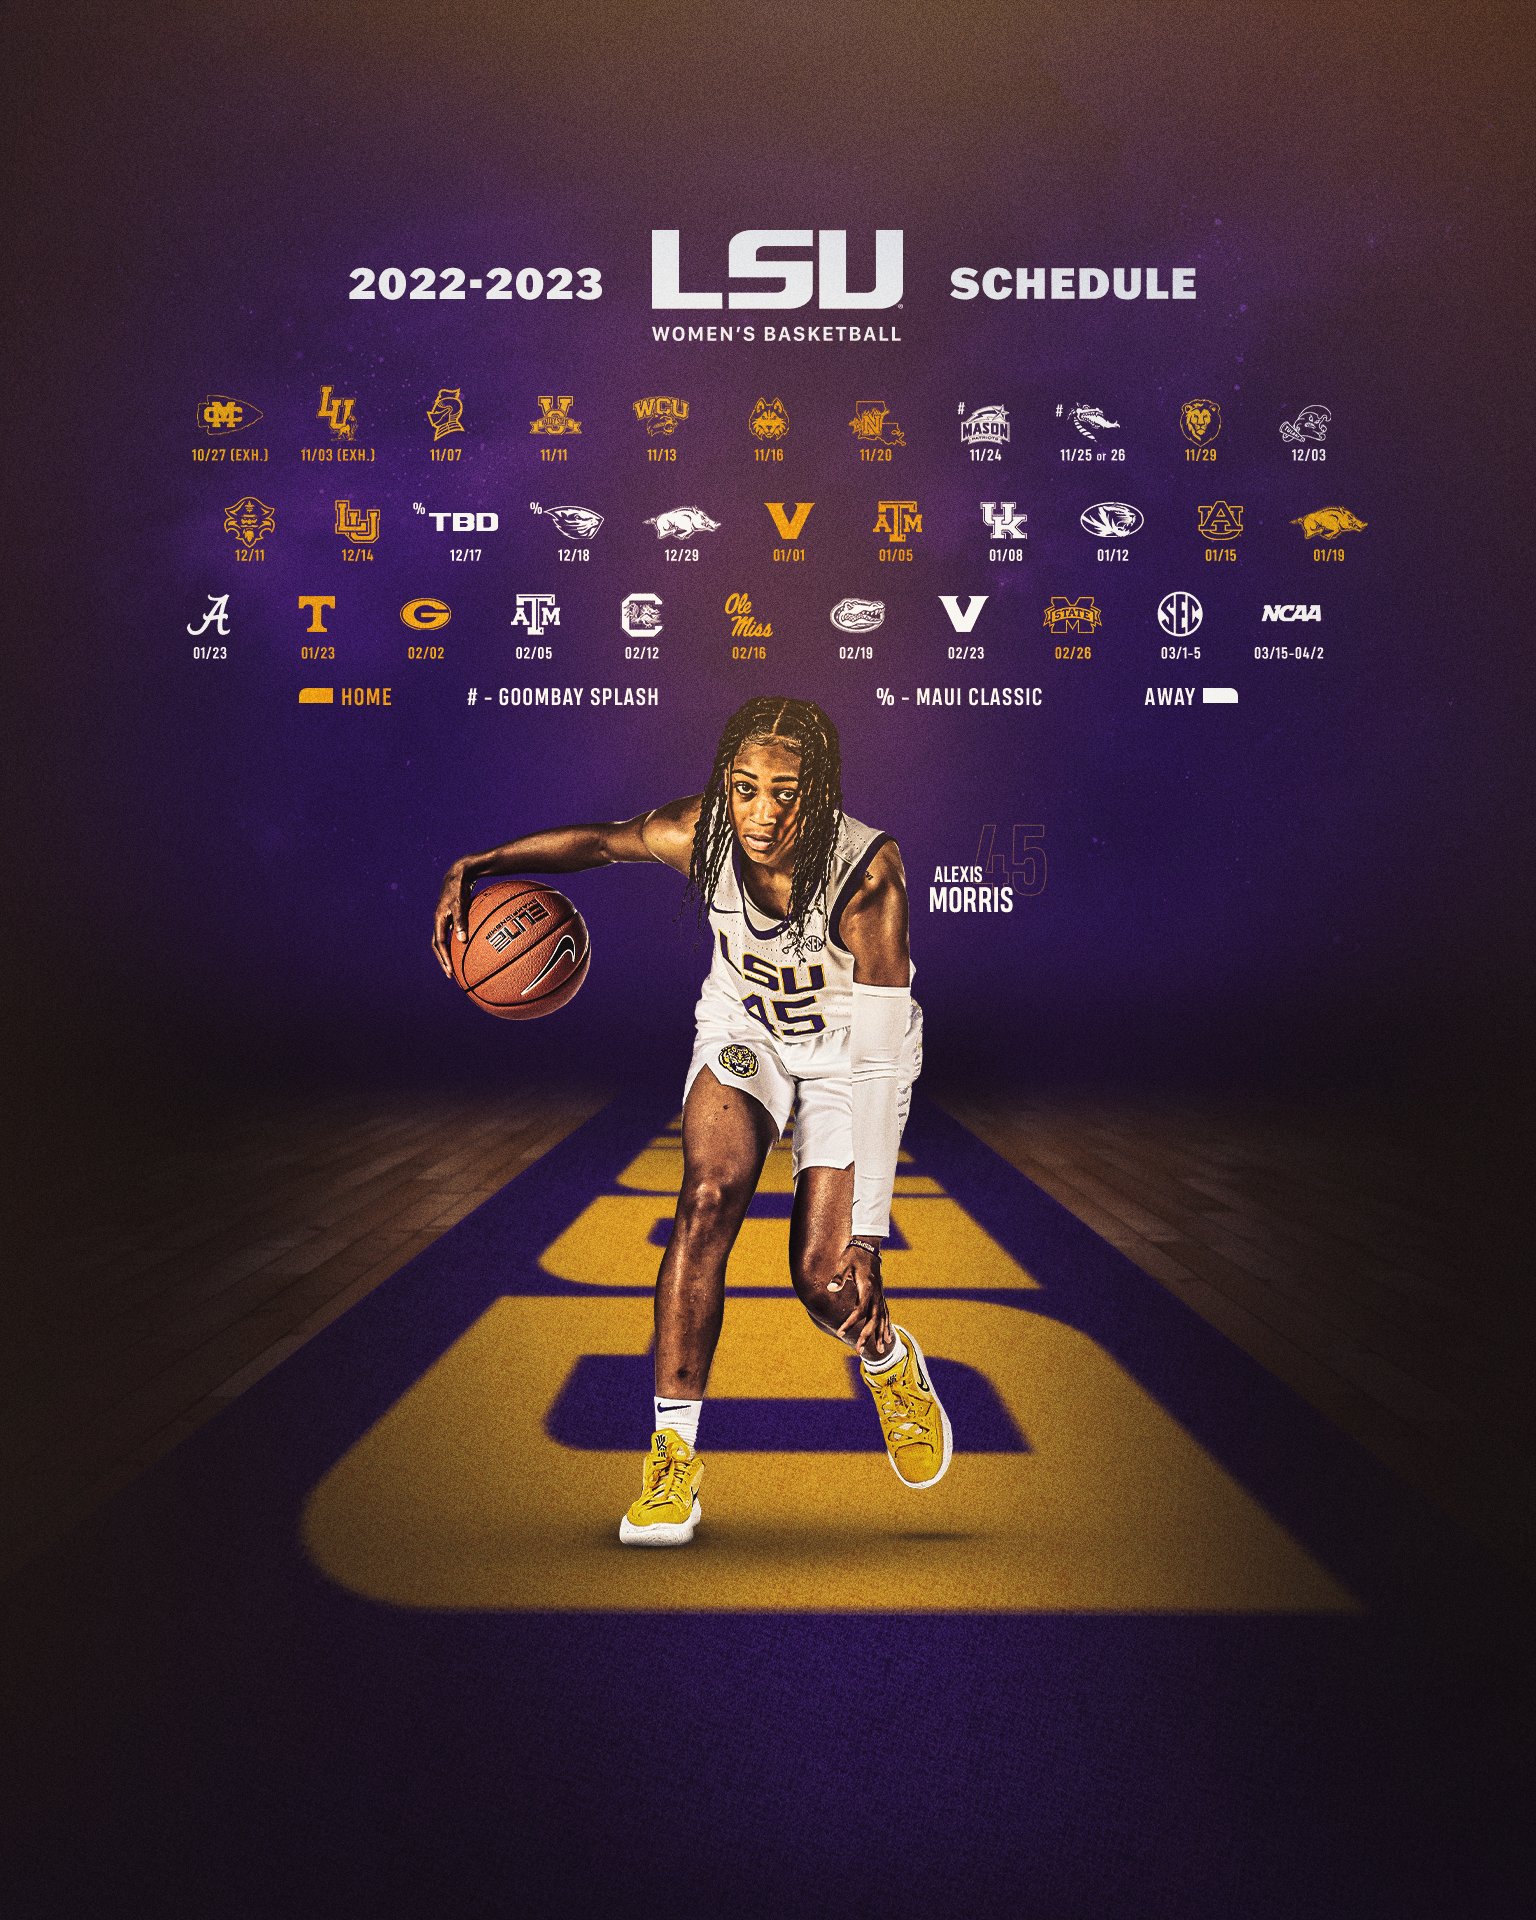 LSU Women's Basketball LSU Women's Basketball Schedule For The 2022 23 Season Has Been Released!